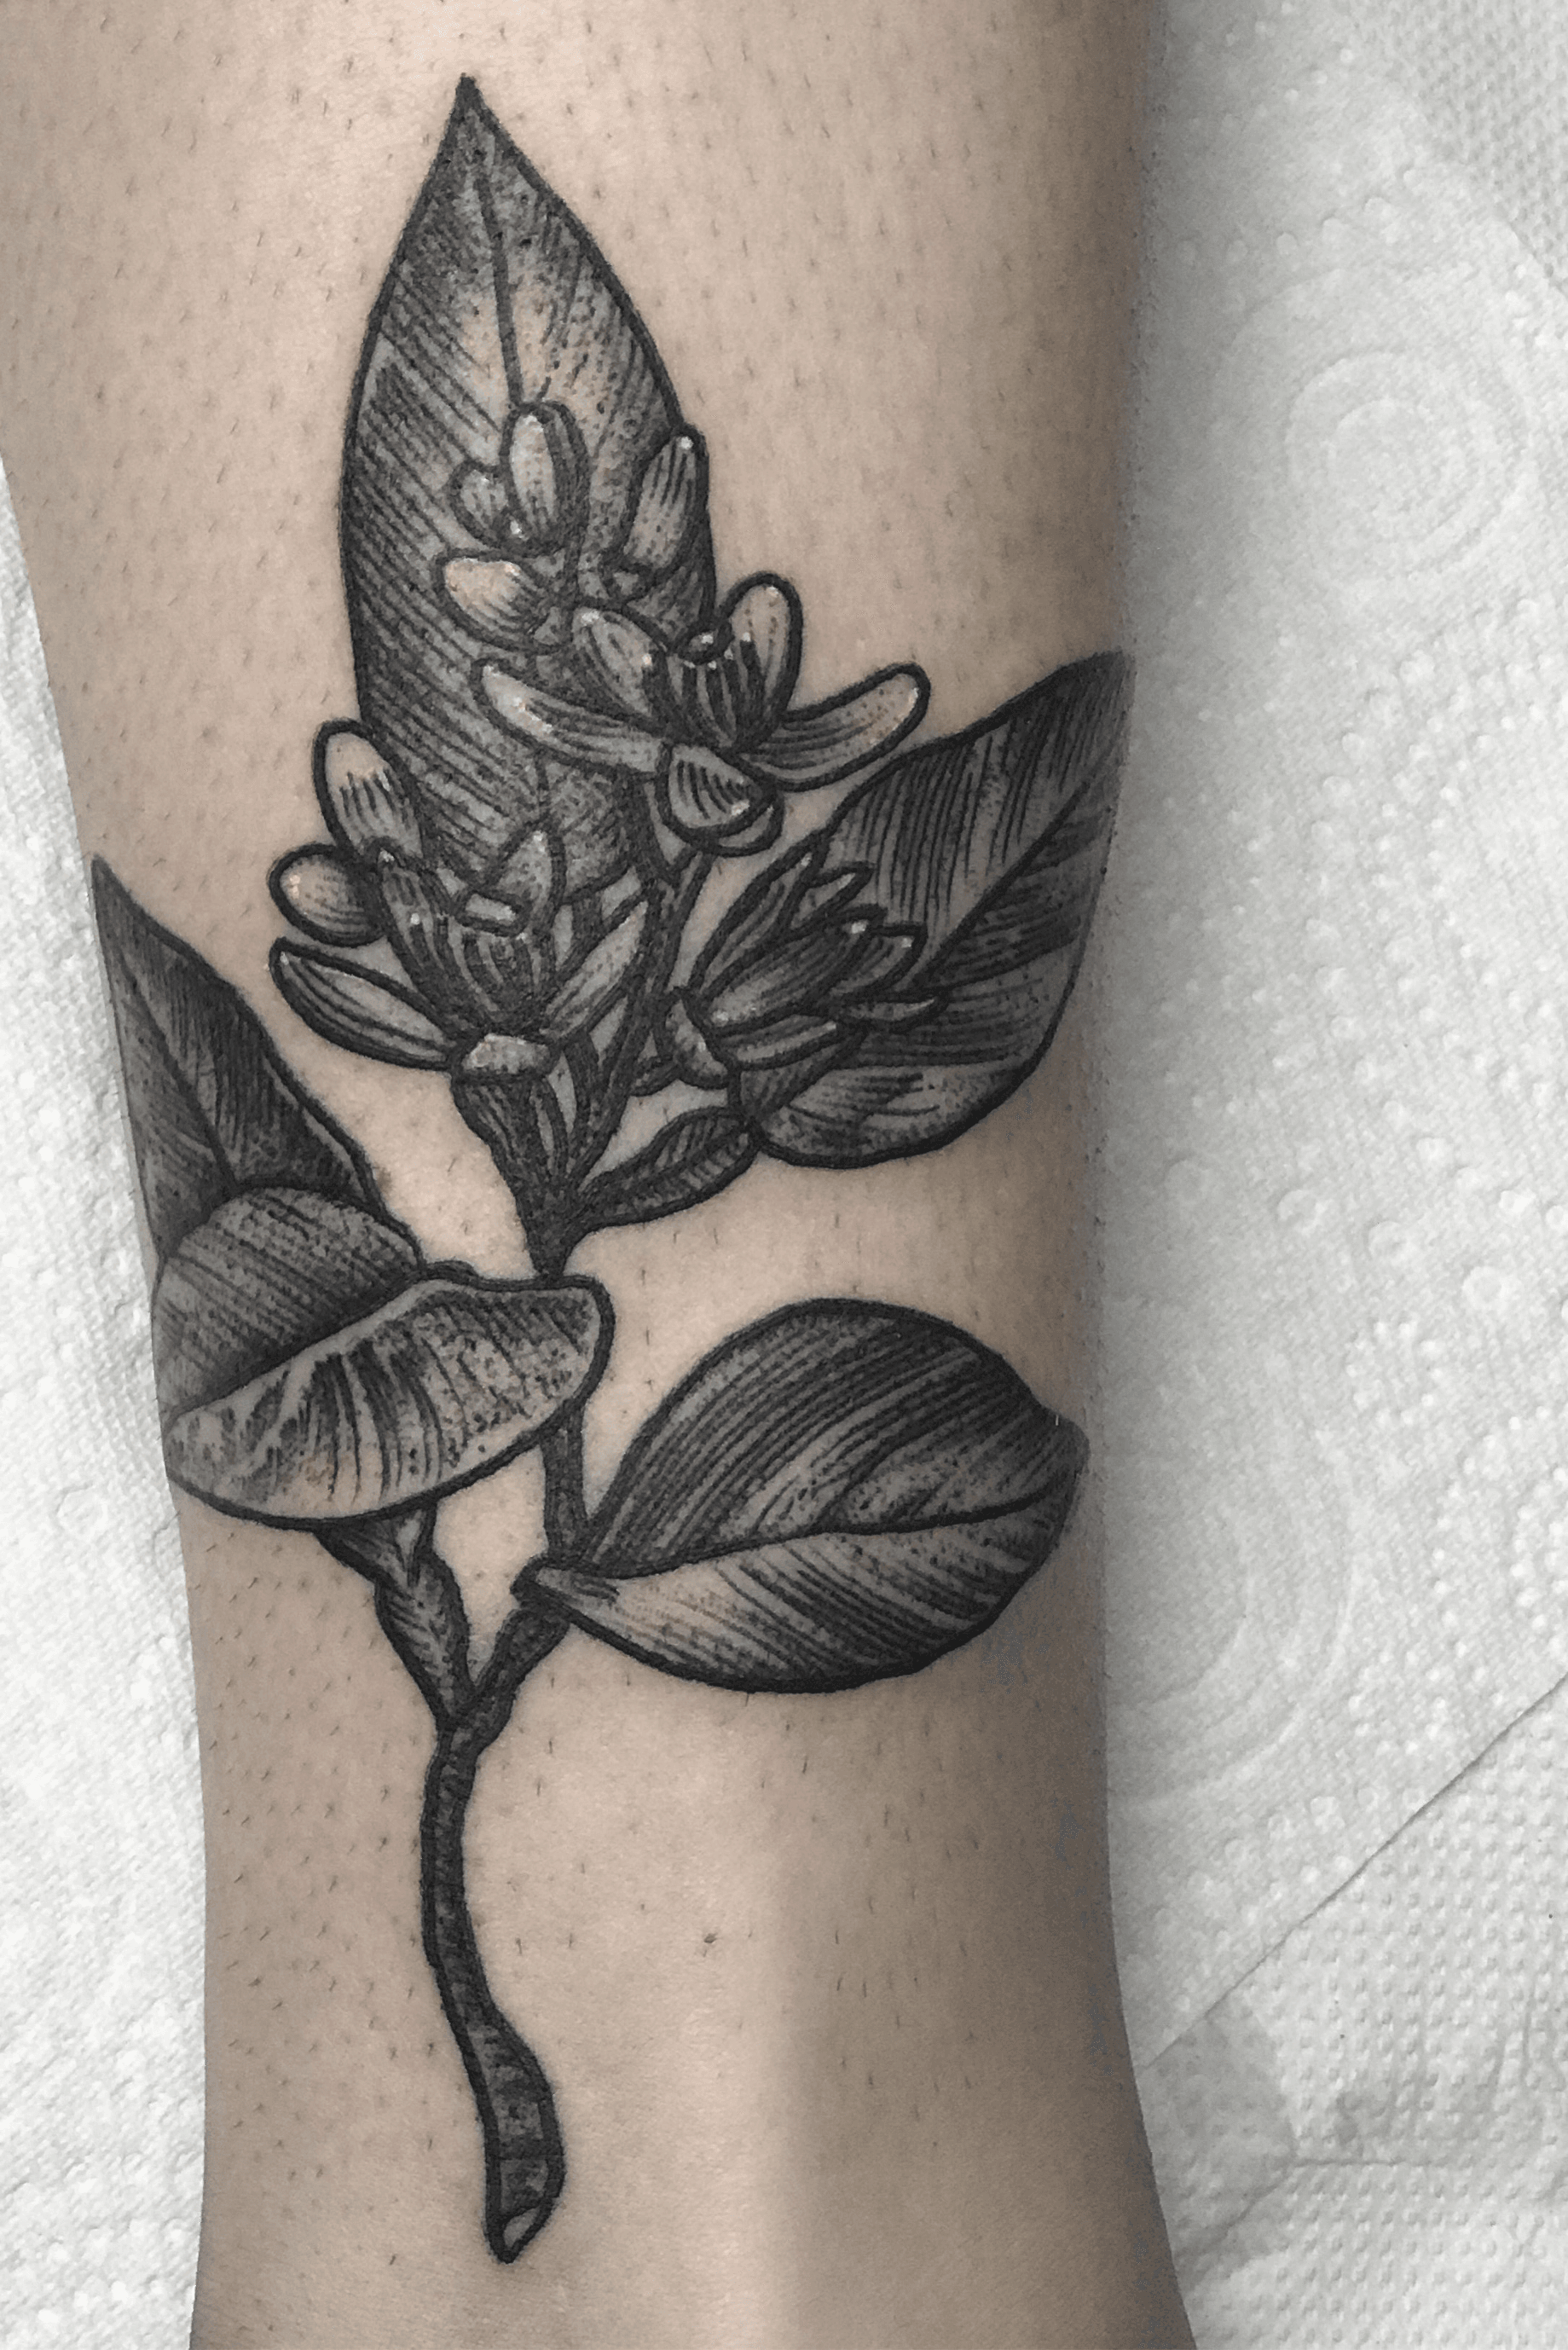 Orange blossoms but maybe a more simplistic version Representing Florida  obviously  Makeup tattoos Beautiful tattoos Blossom tattoo